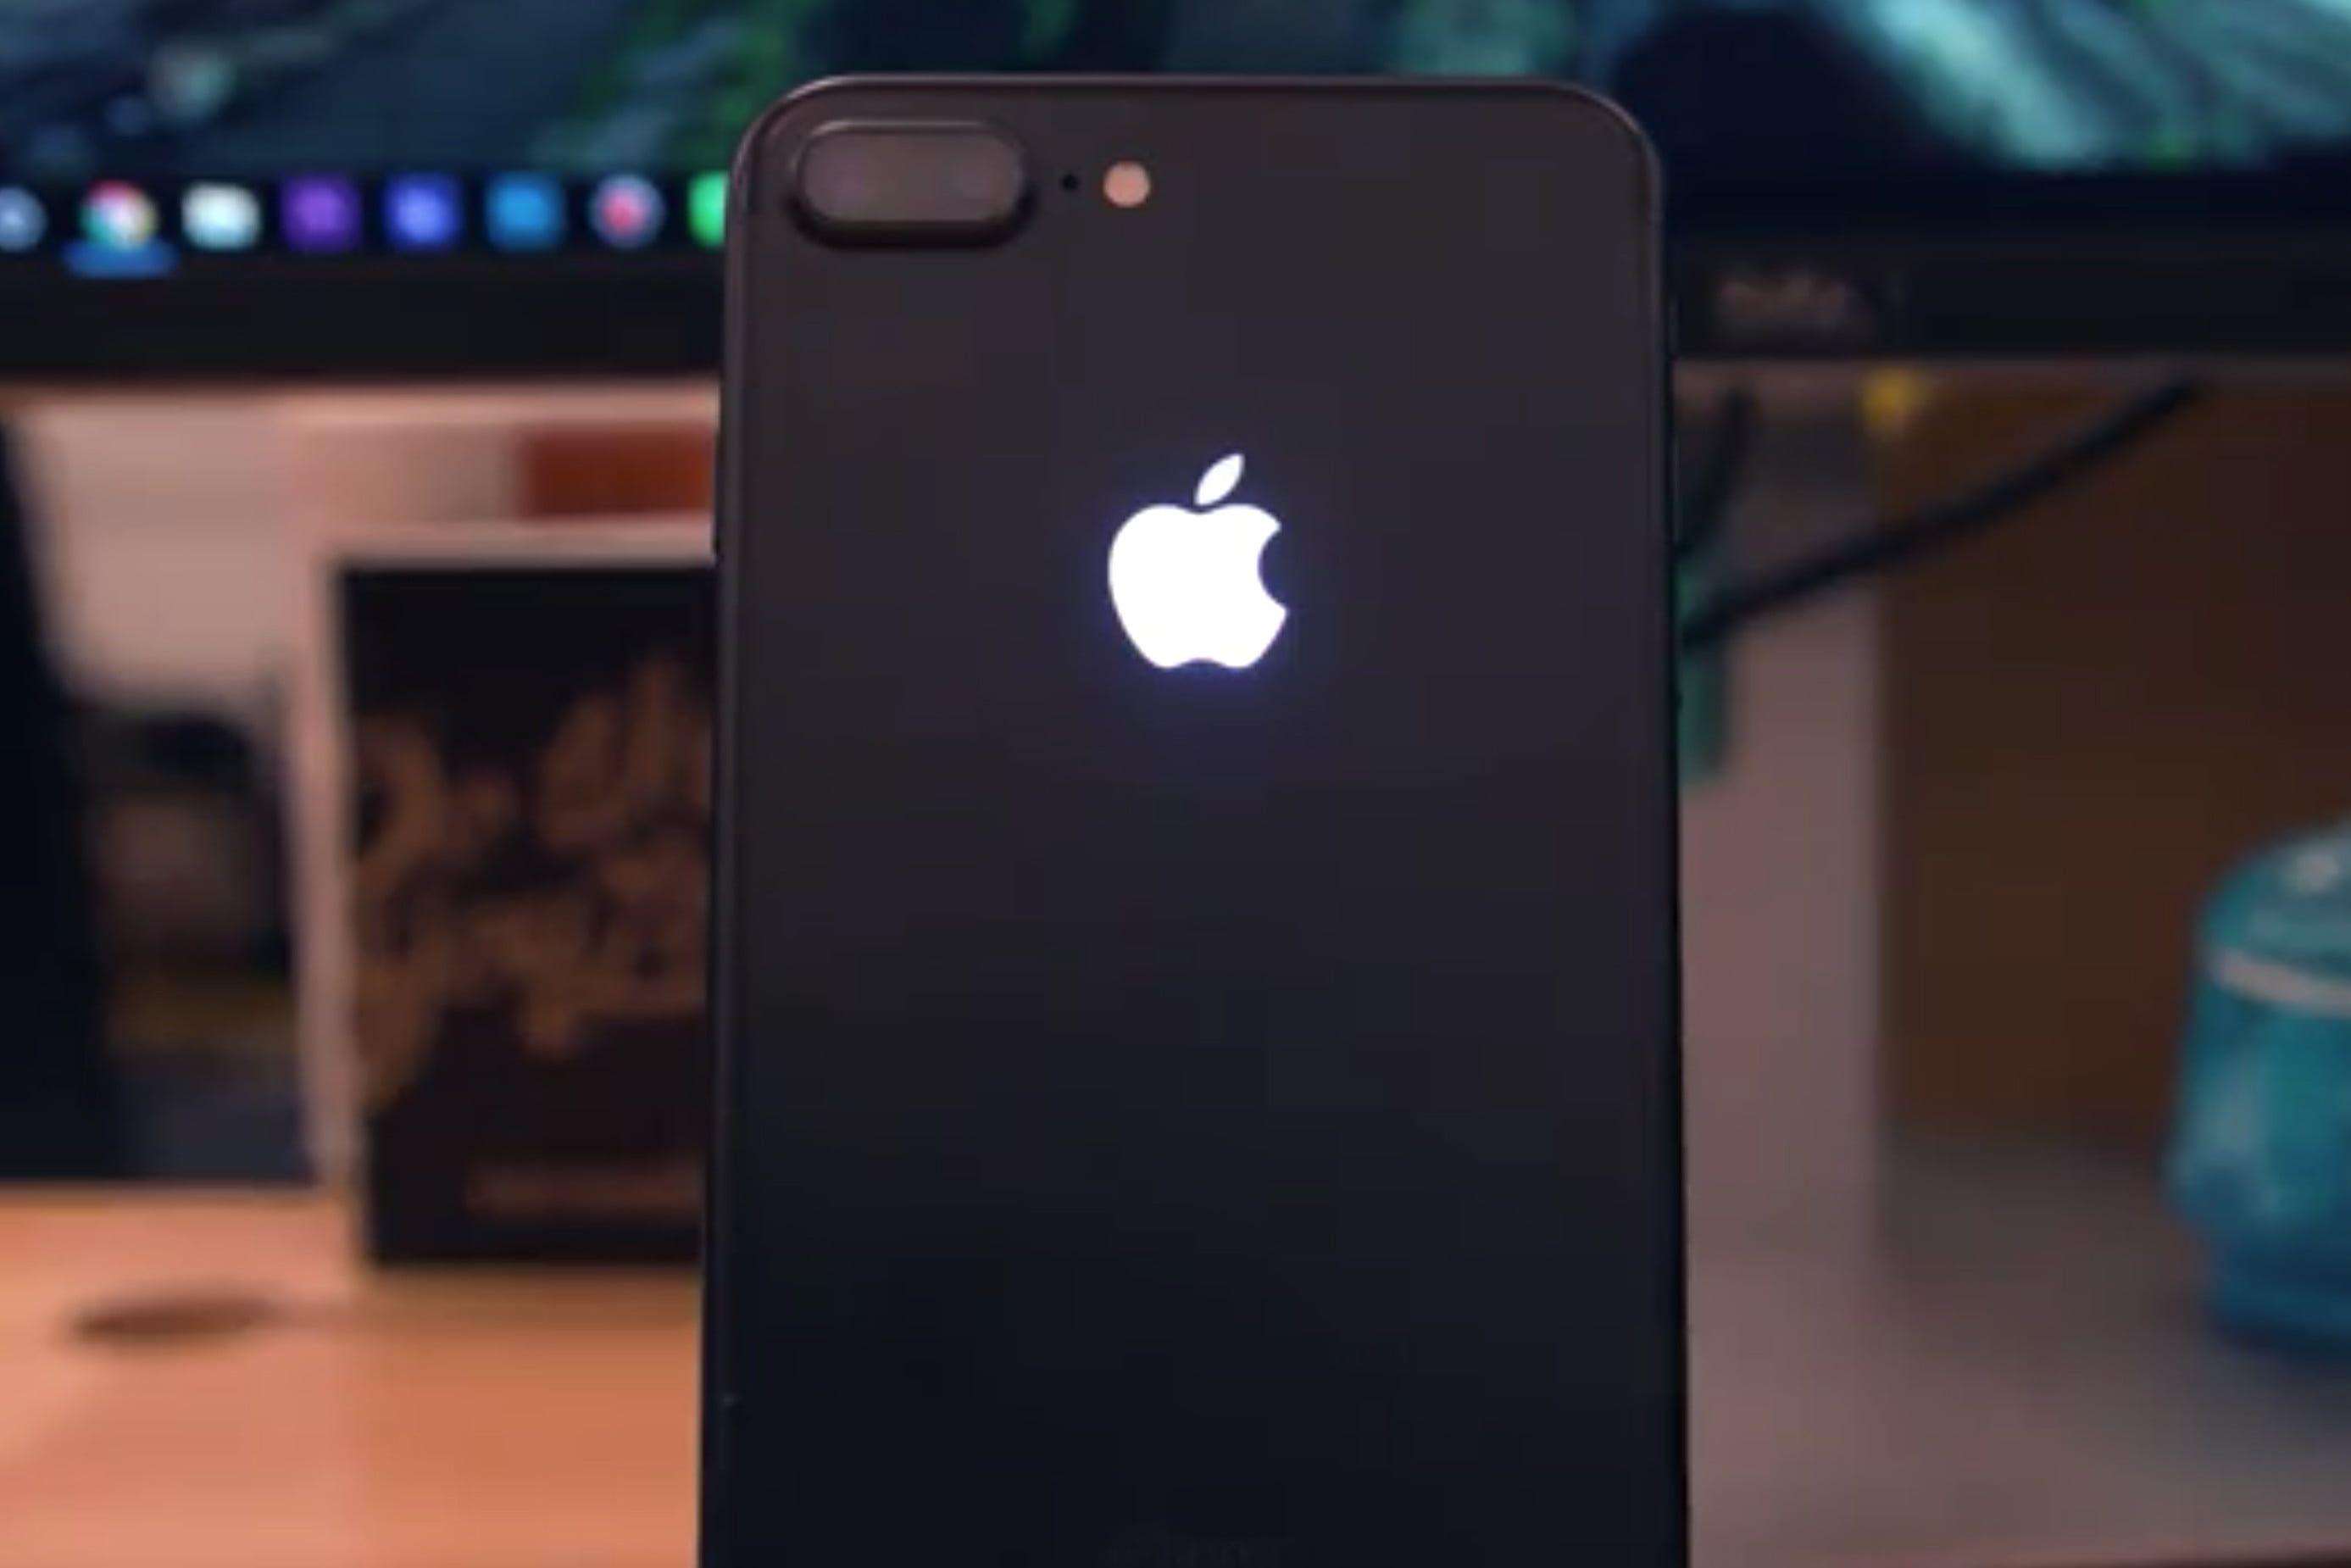 iPhone Apple Logo - How to Make the Apple Logo on an iPhone 7 Light Up